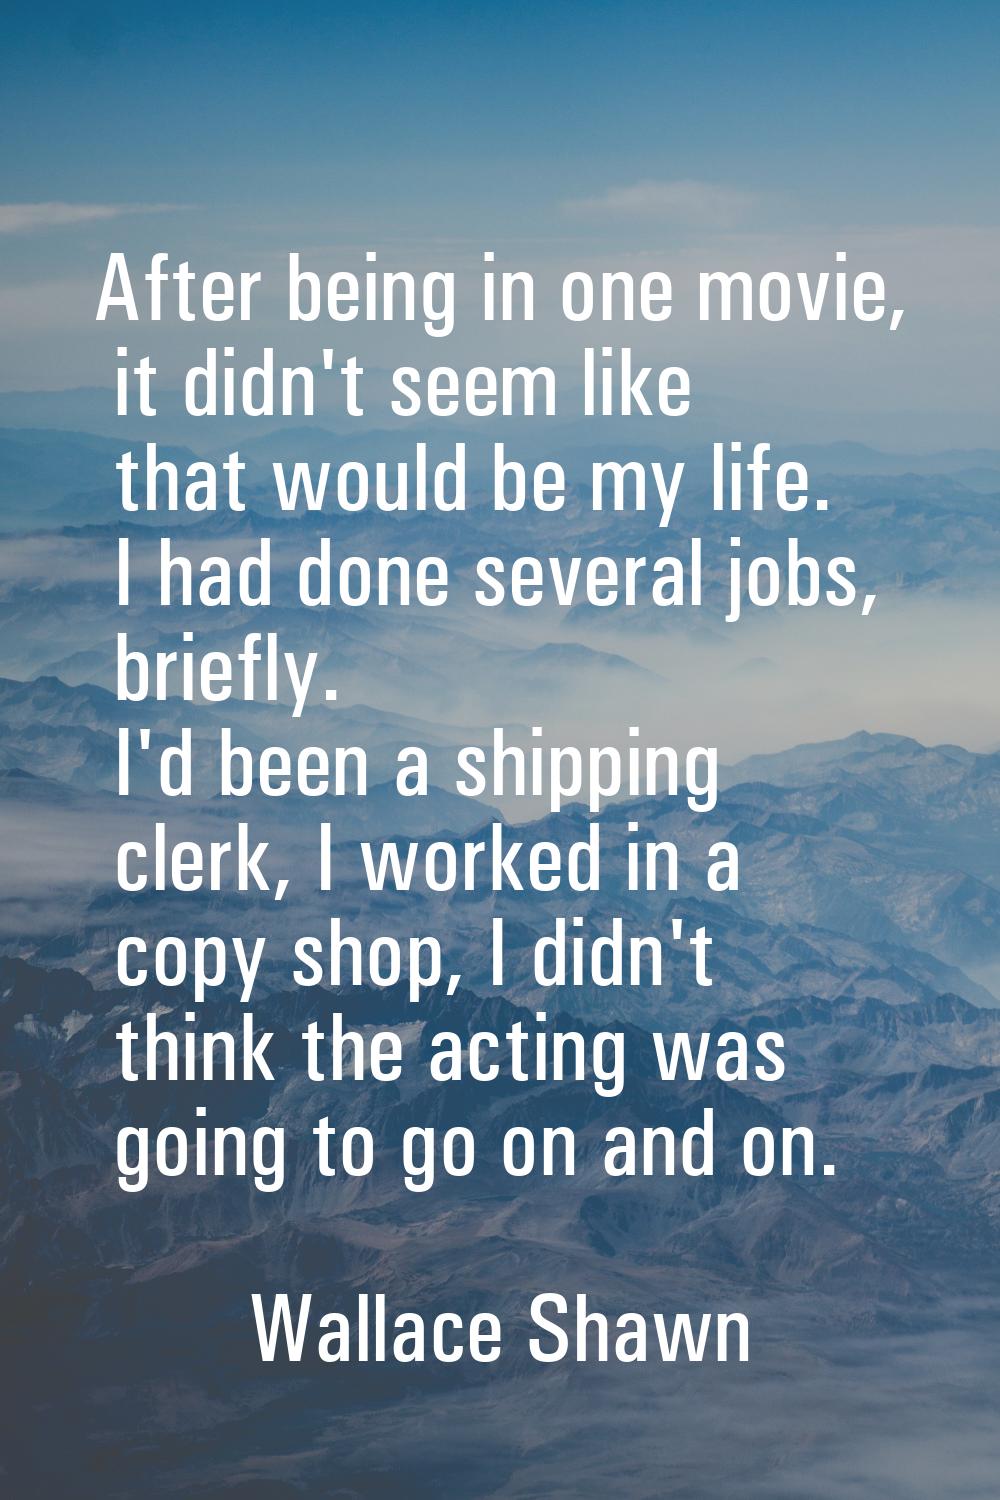 After being in one movie, it didn't seem like that would be my life. I had done several jobs, brief